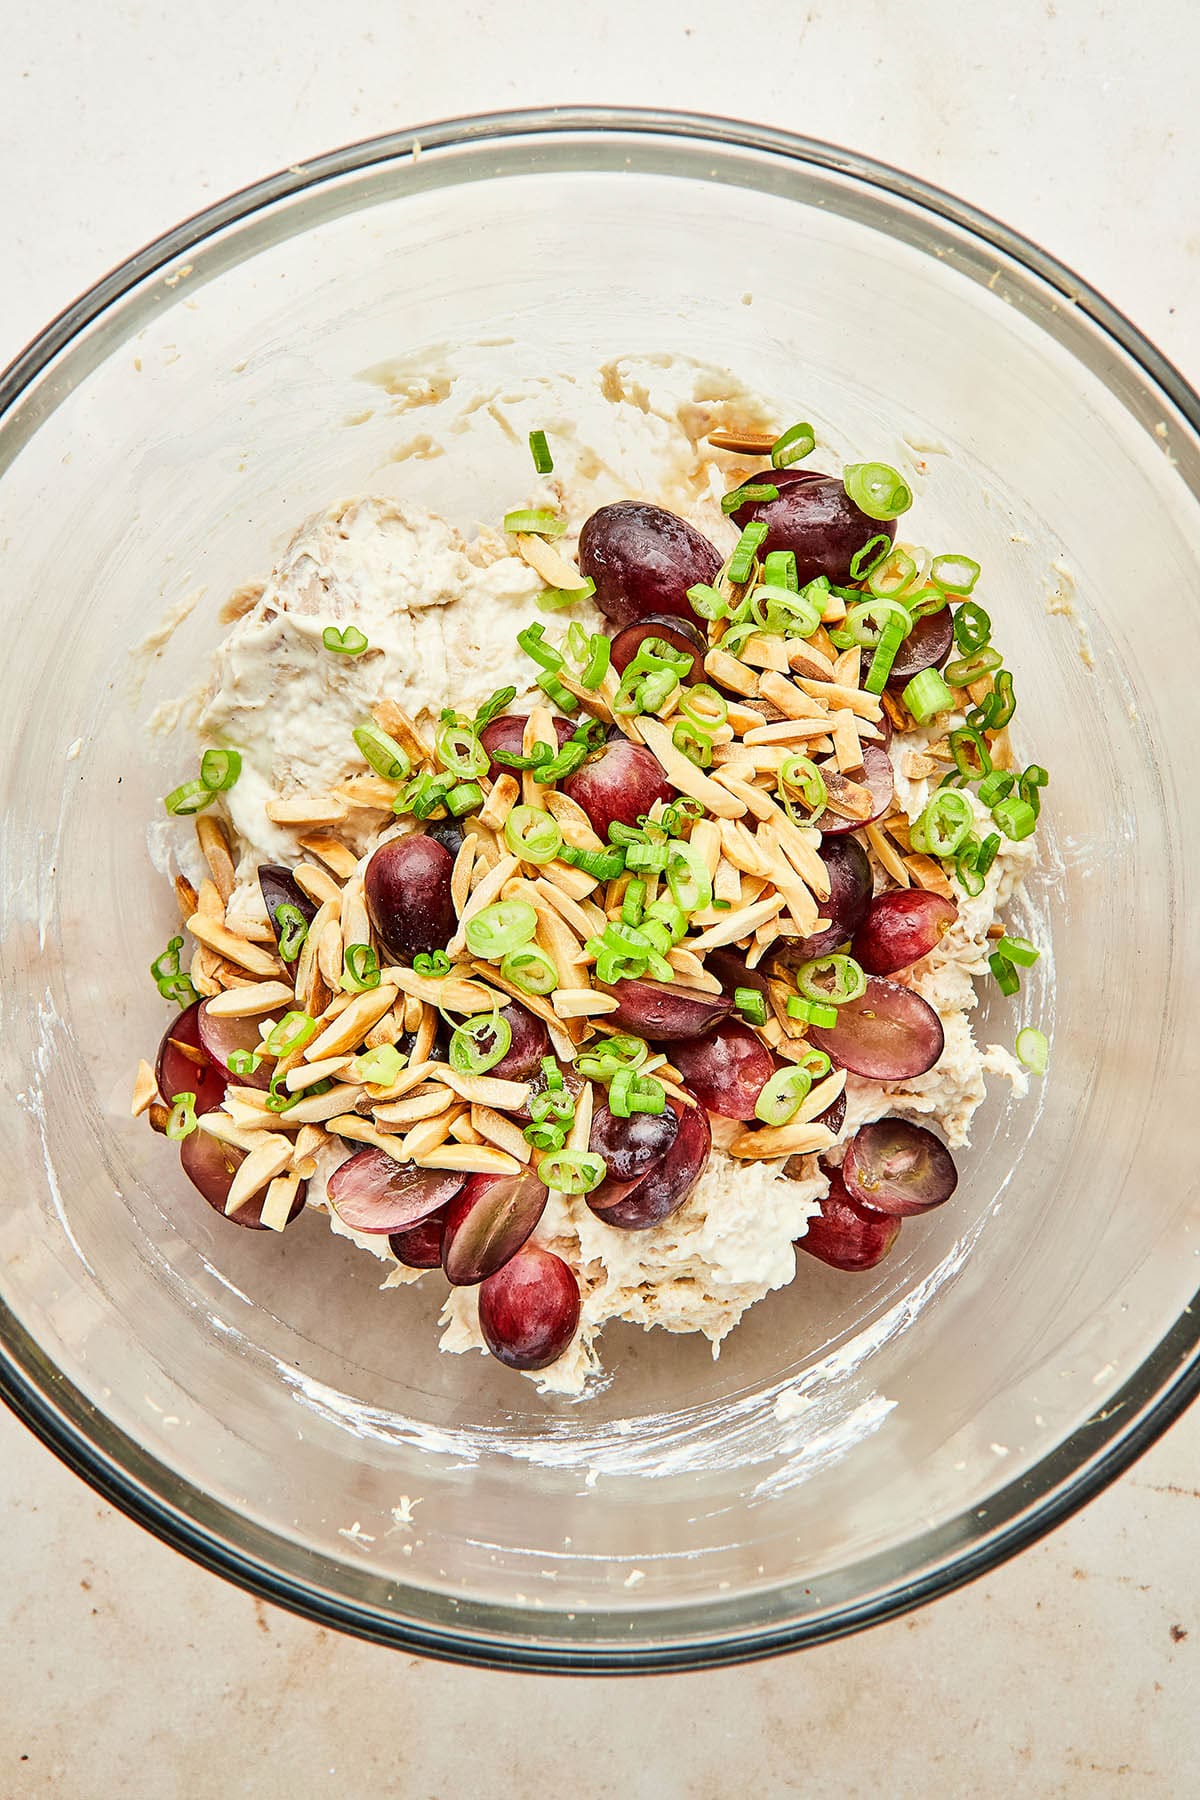 Toasted slivered almonds, red grapes, and sliced green onions about to be mixed into shredded chicken salad.